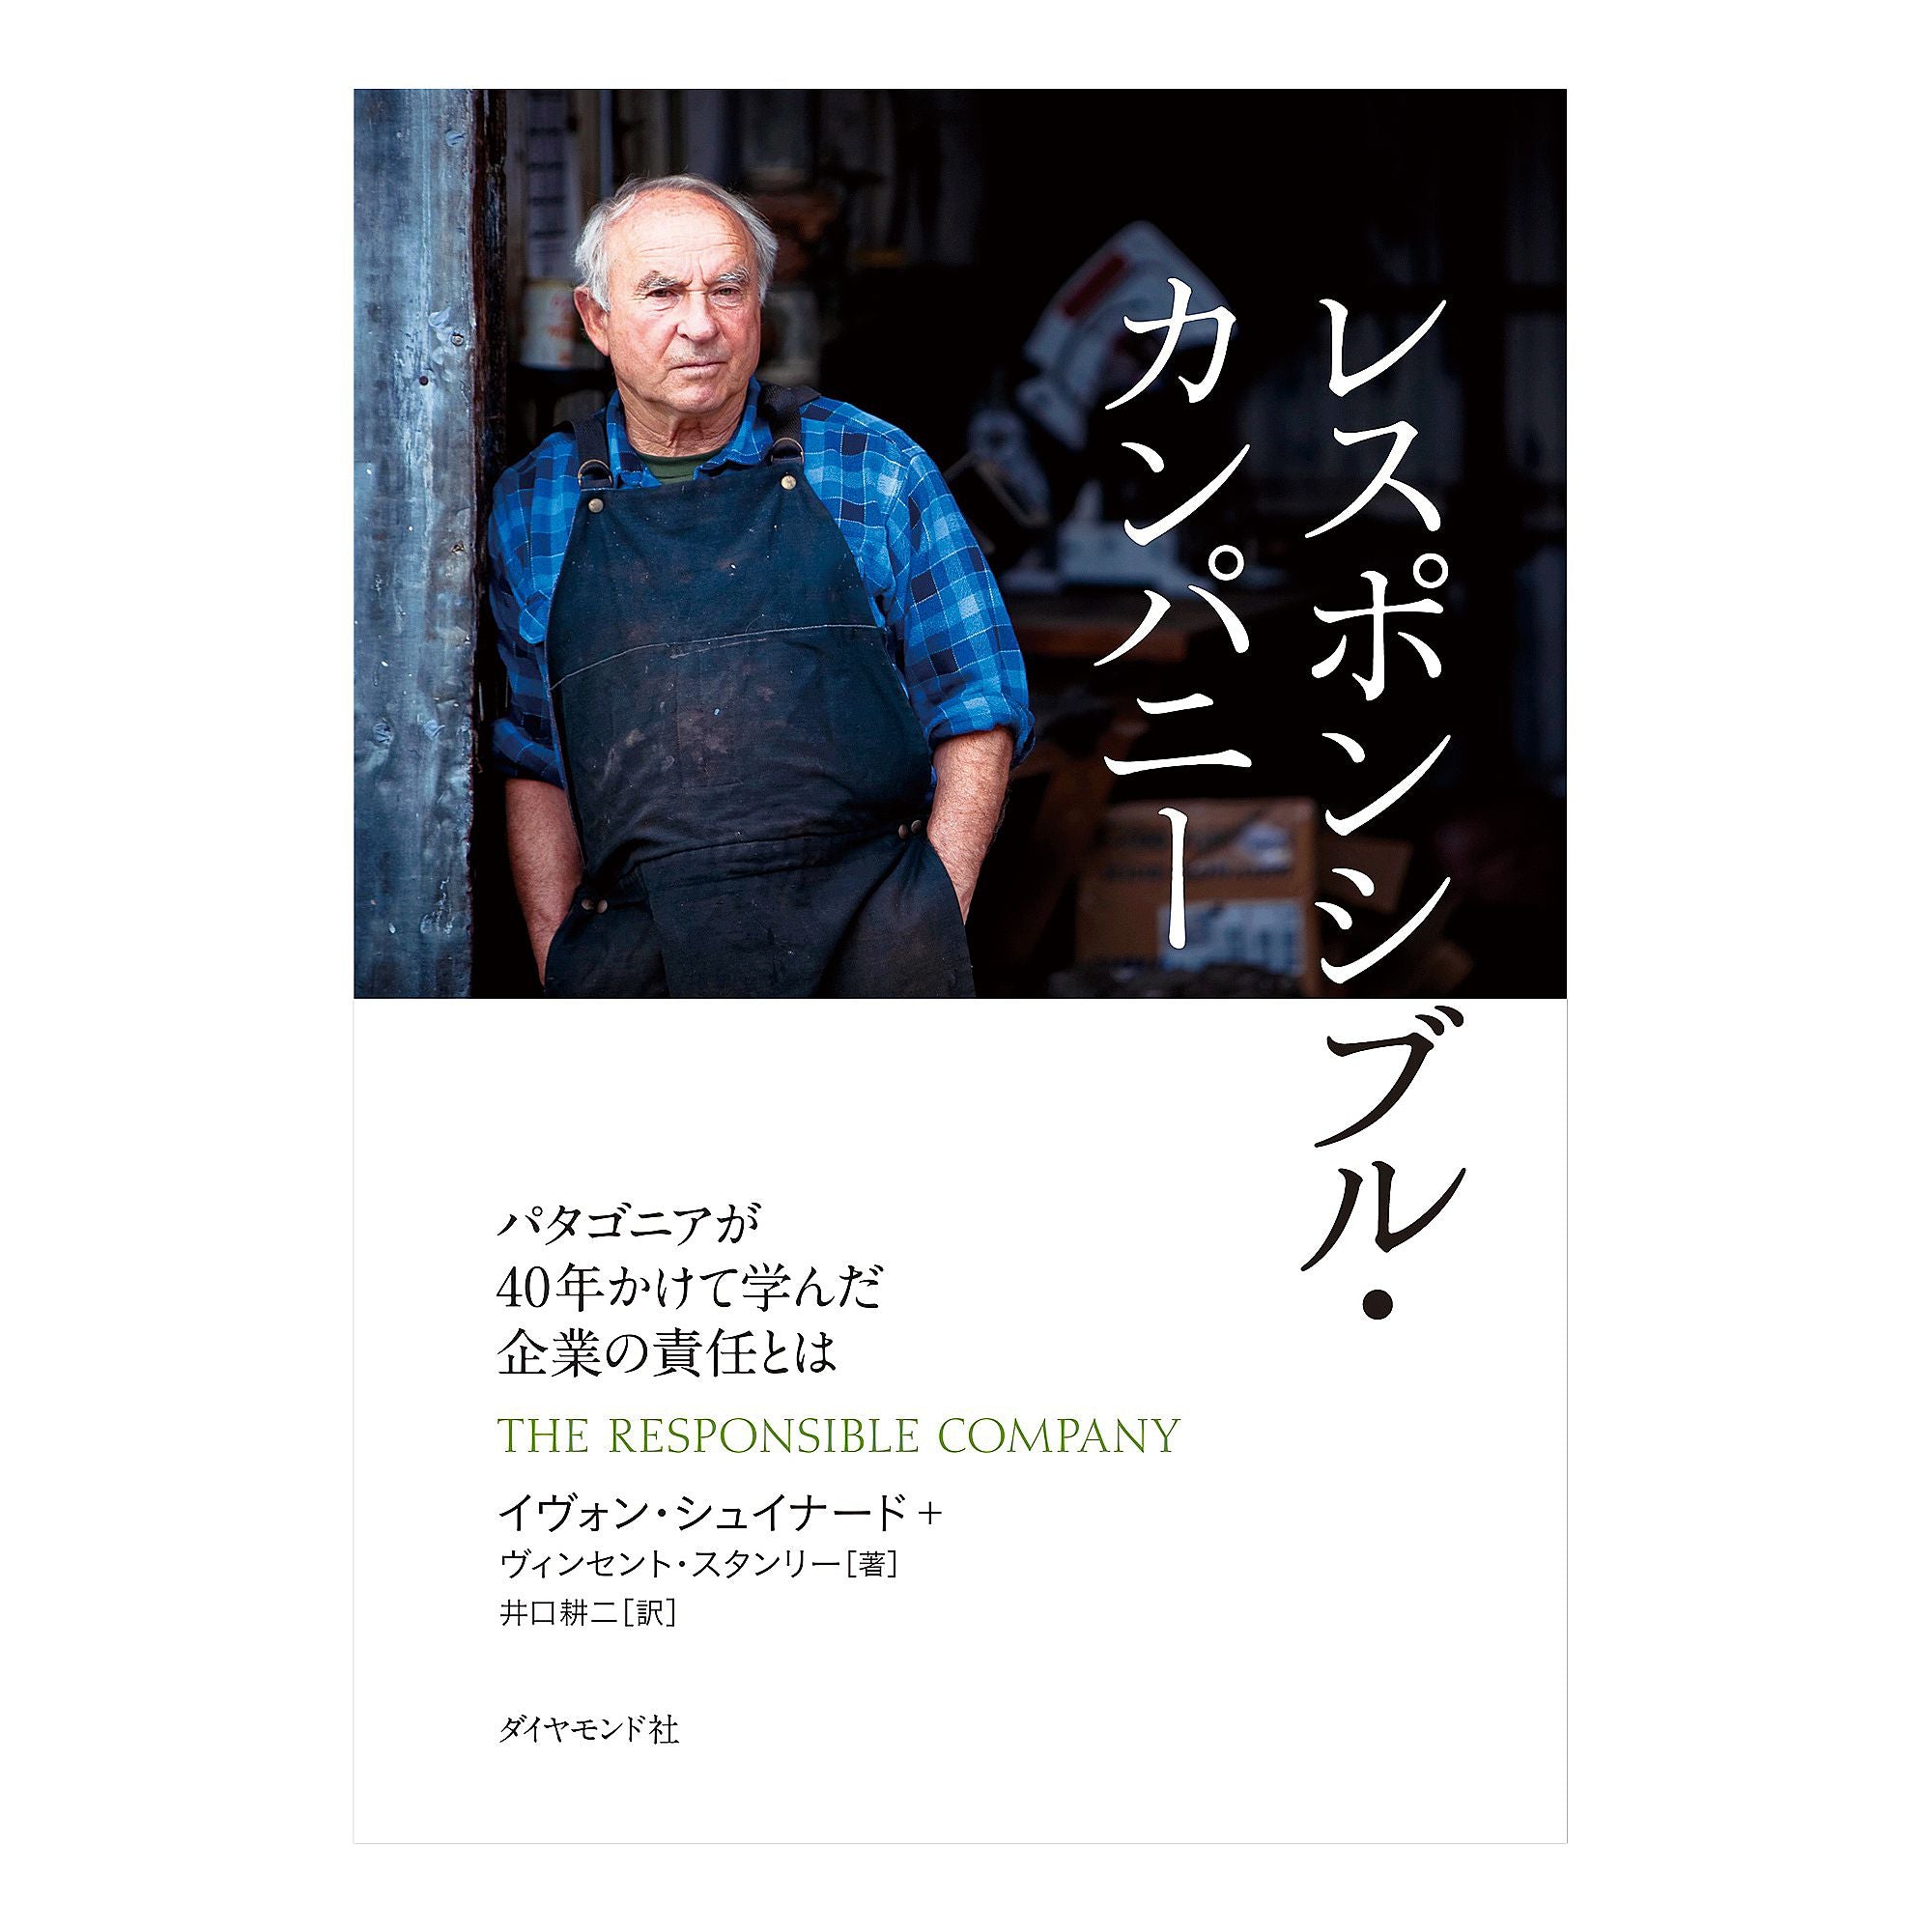 PATAGONIA The Responsible Company: What is Patagonia's 40 Years of Corporate Responsibility / Japanese Version